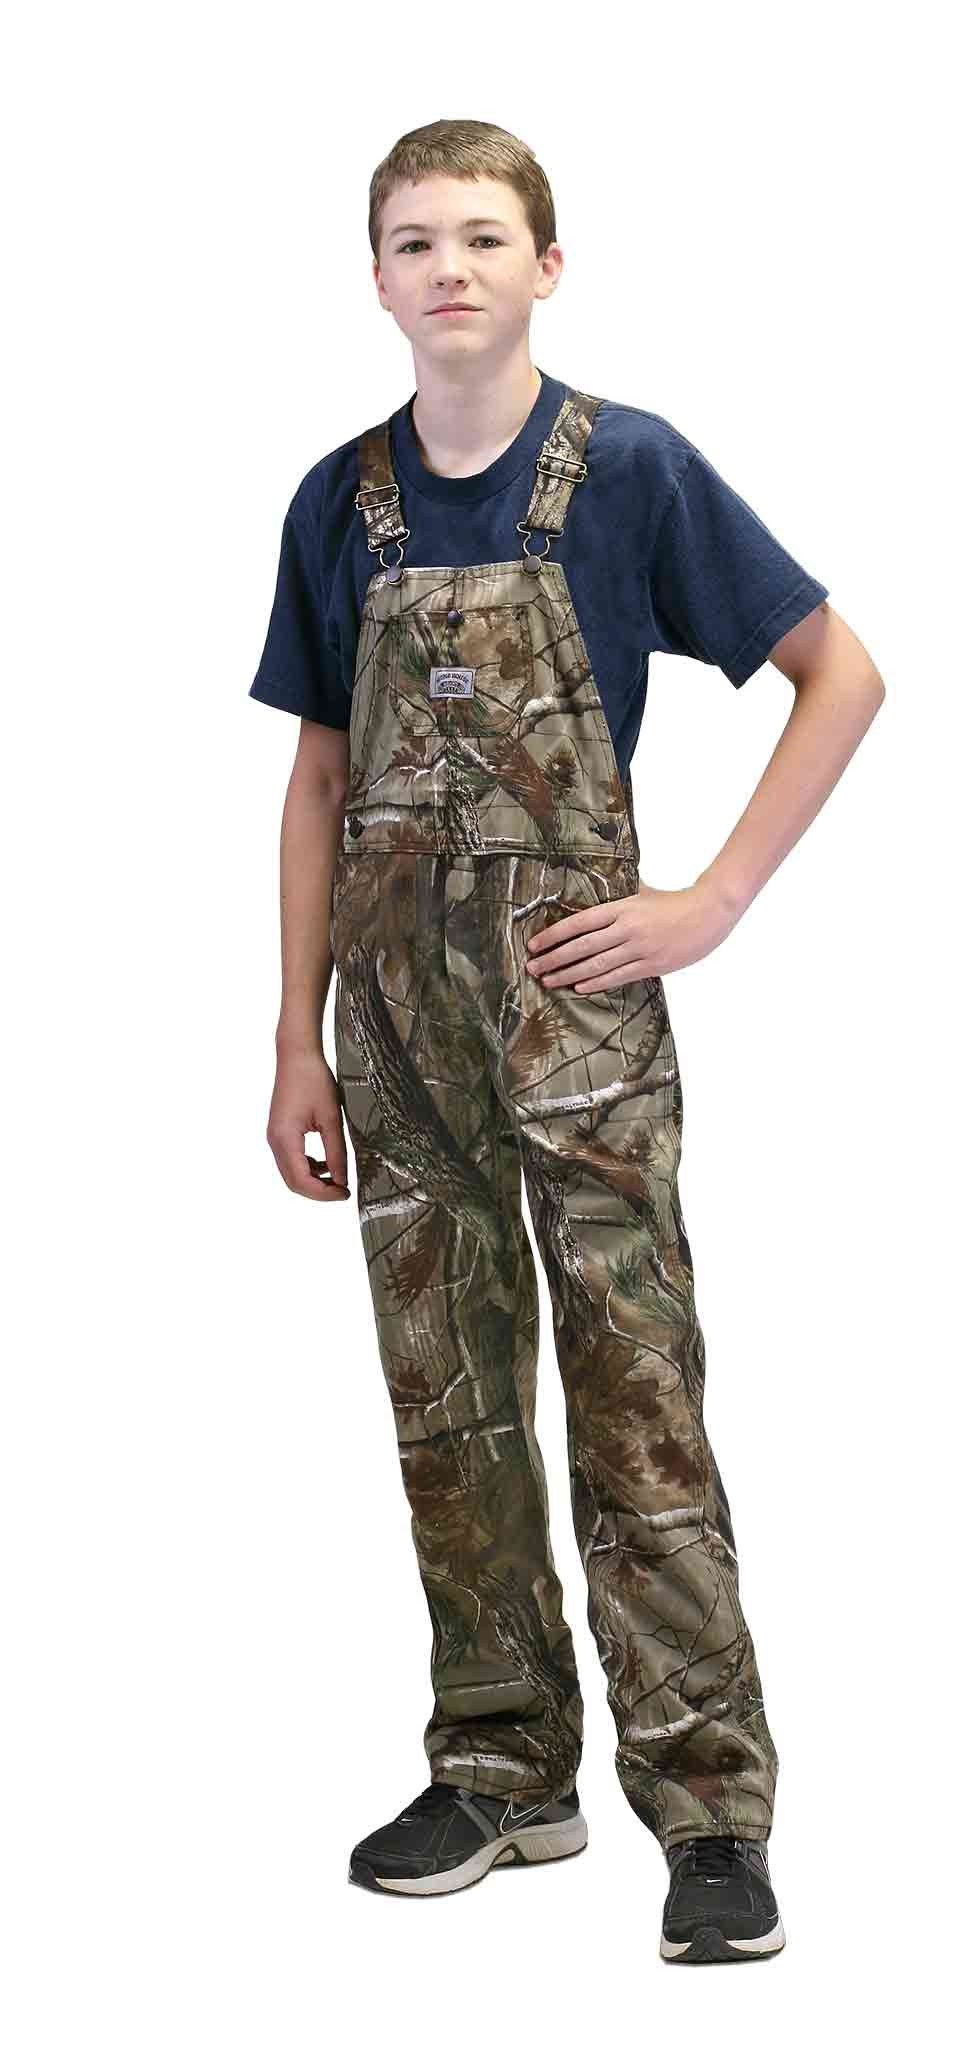 Made in USA Boys Realtree Camo Overall, American Made Kids